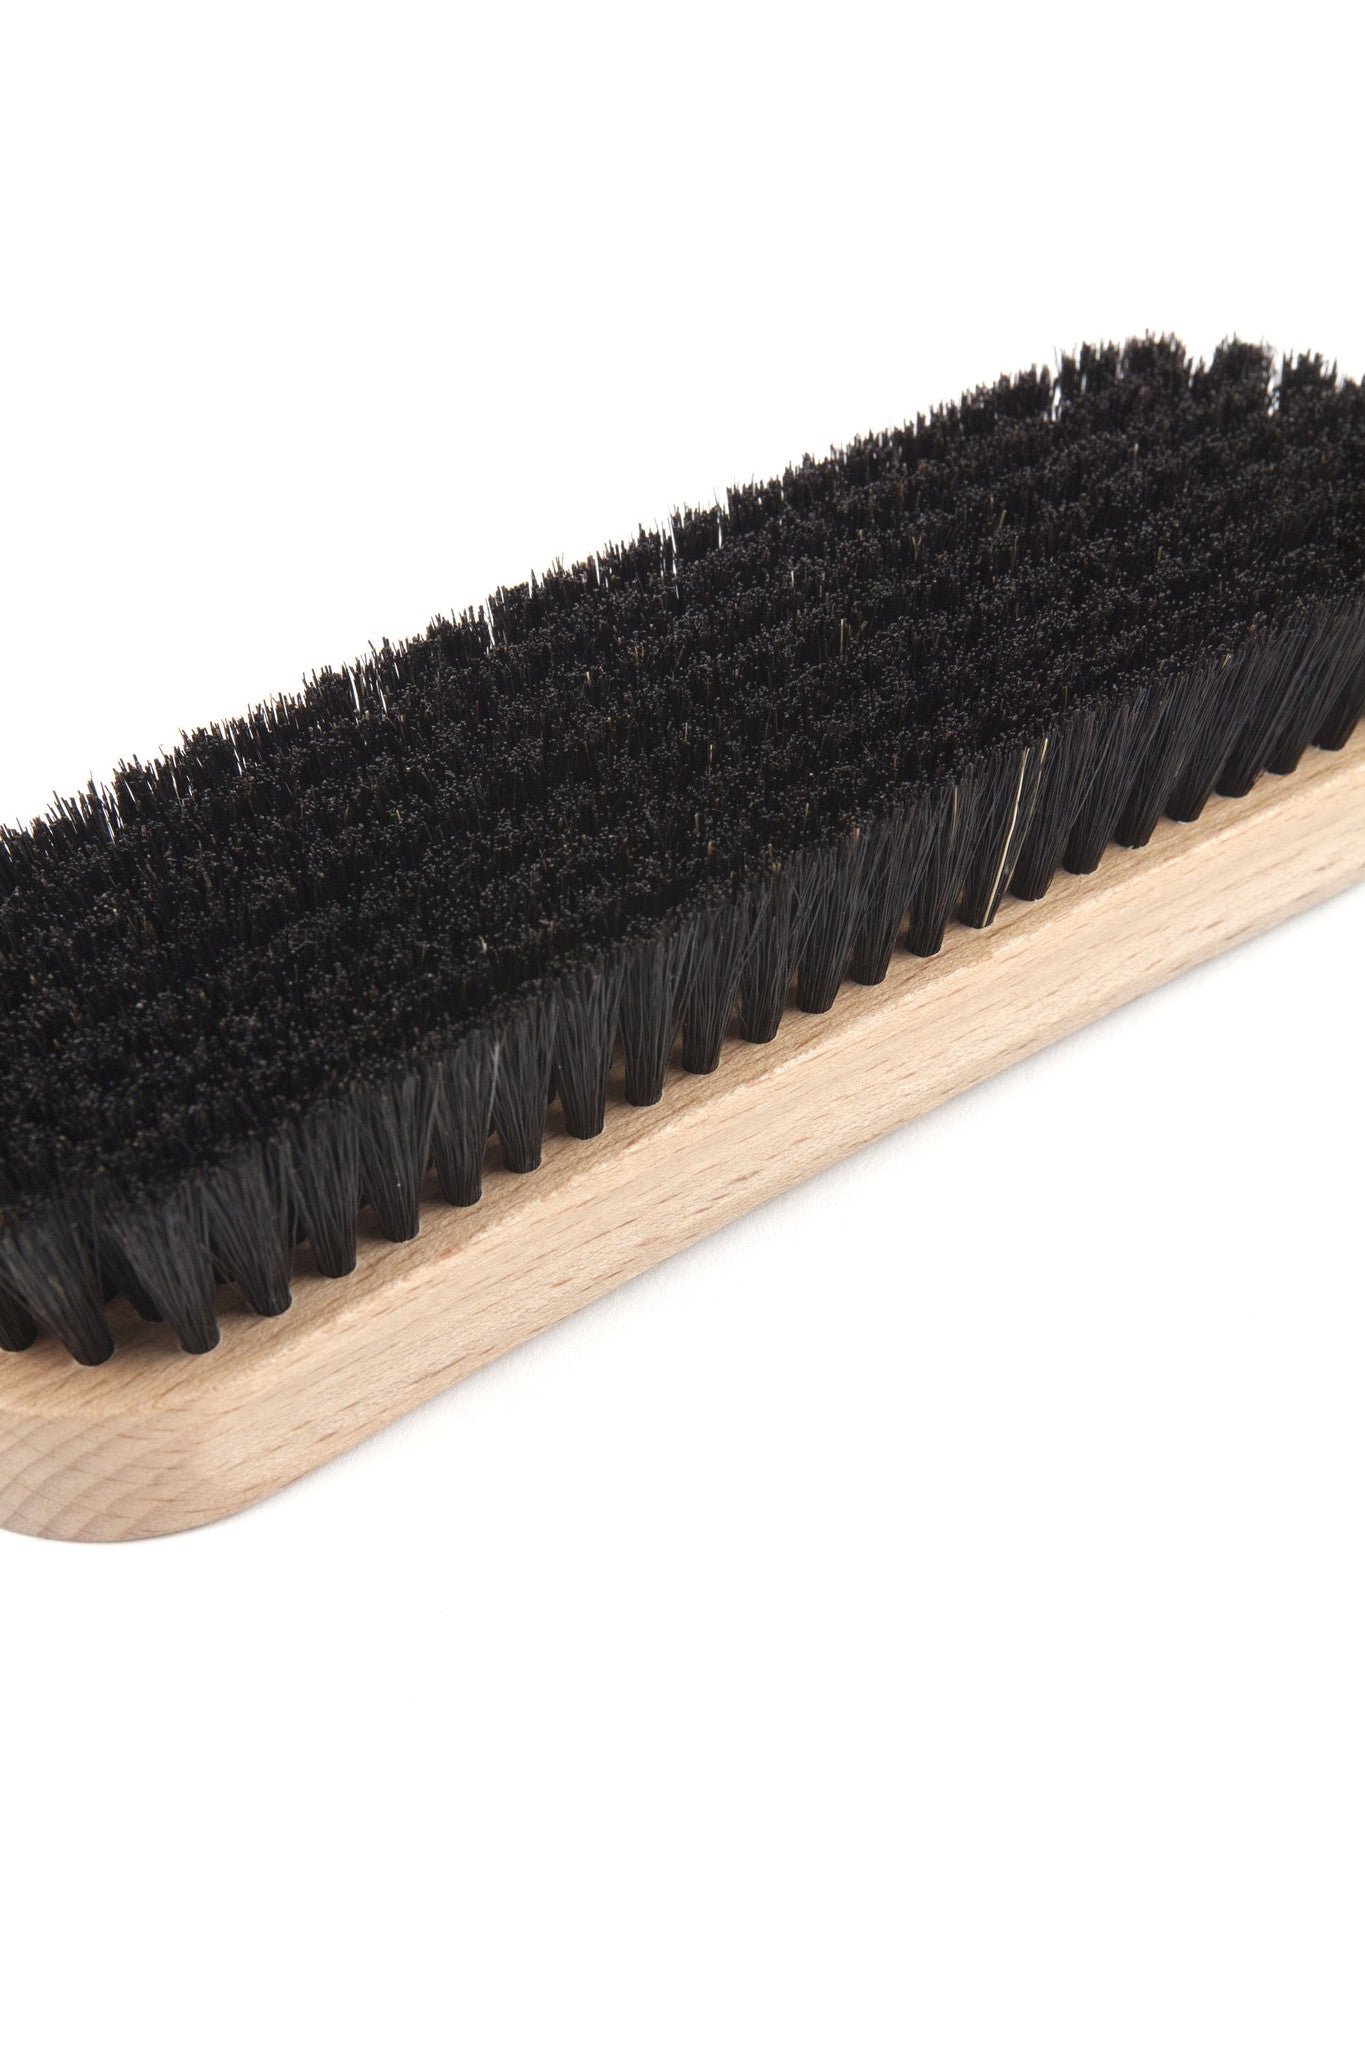 Andrée Jardin Tradition Clothing Brush Utilities Andrée Jardin Andrée Jardin Brand_Andrée Jardin Home_Broom Sets Home_Household Cleaning Shoe & Textile Brushes 5300-1712_Clothing_Brush_E